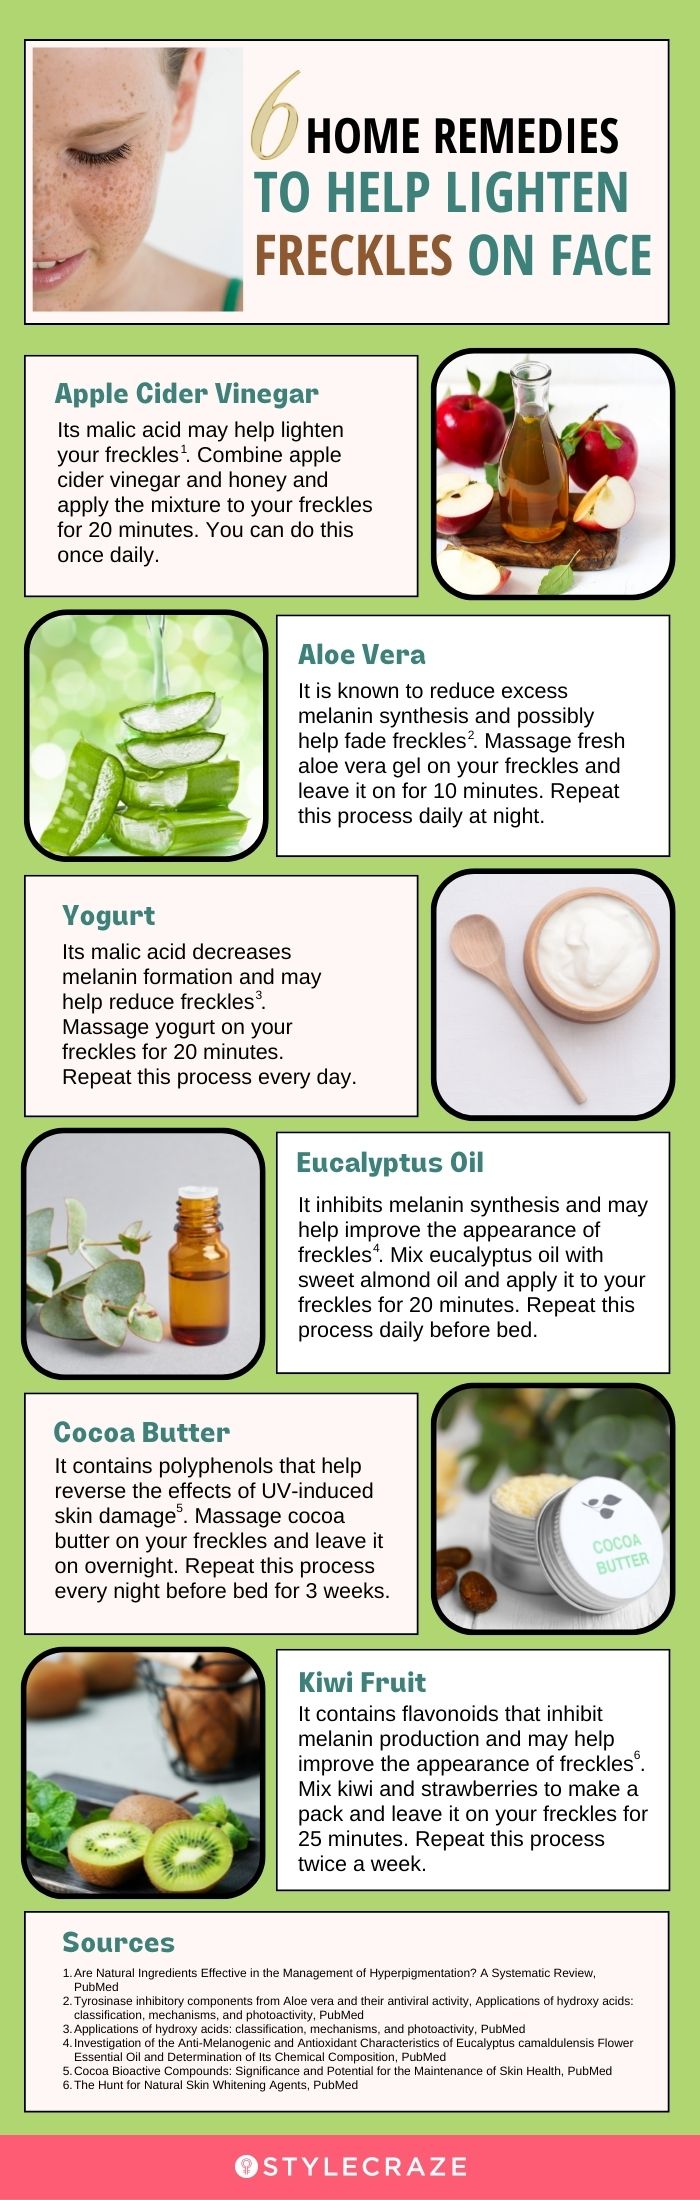 6 home remedies to help lighten freckles on face [infographic]